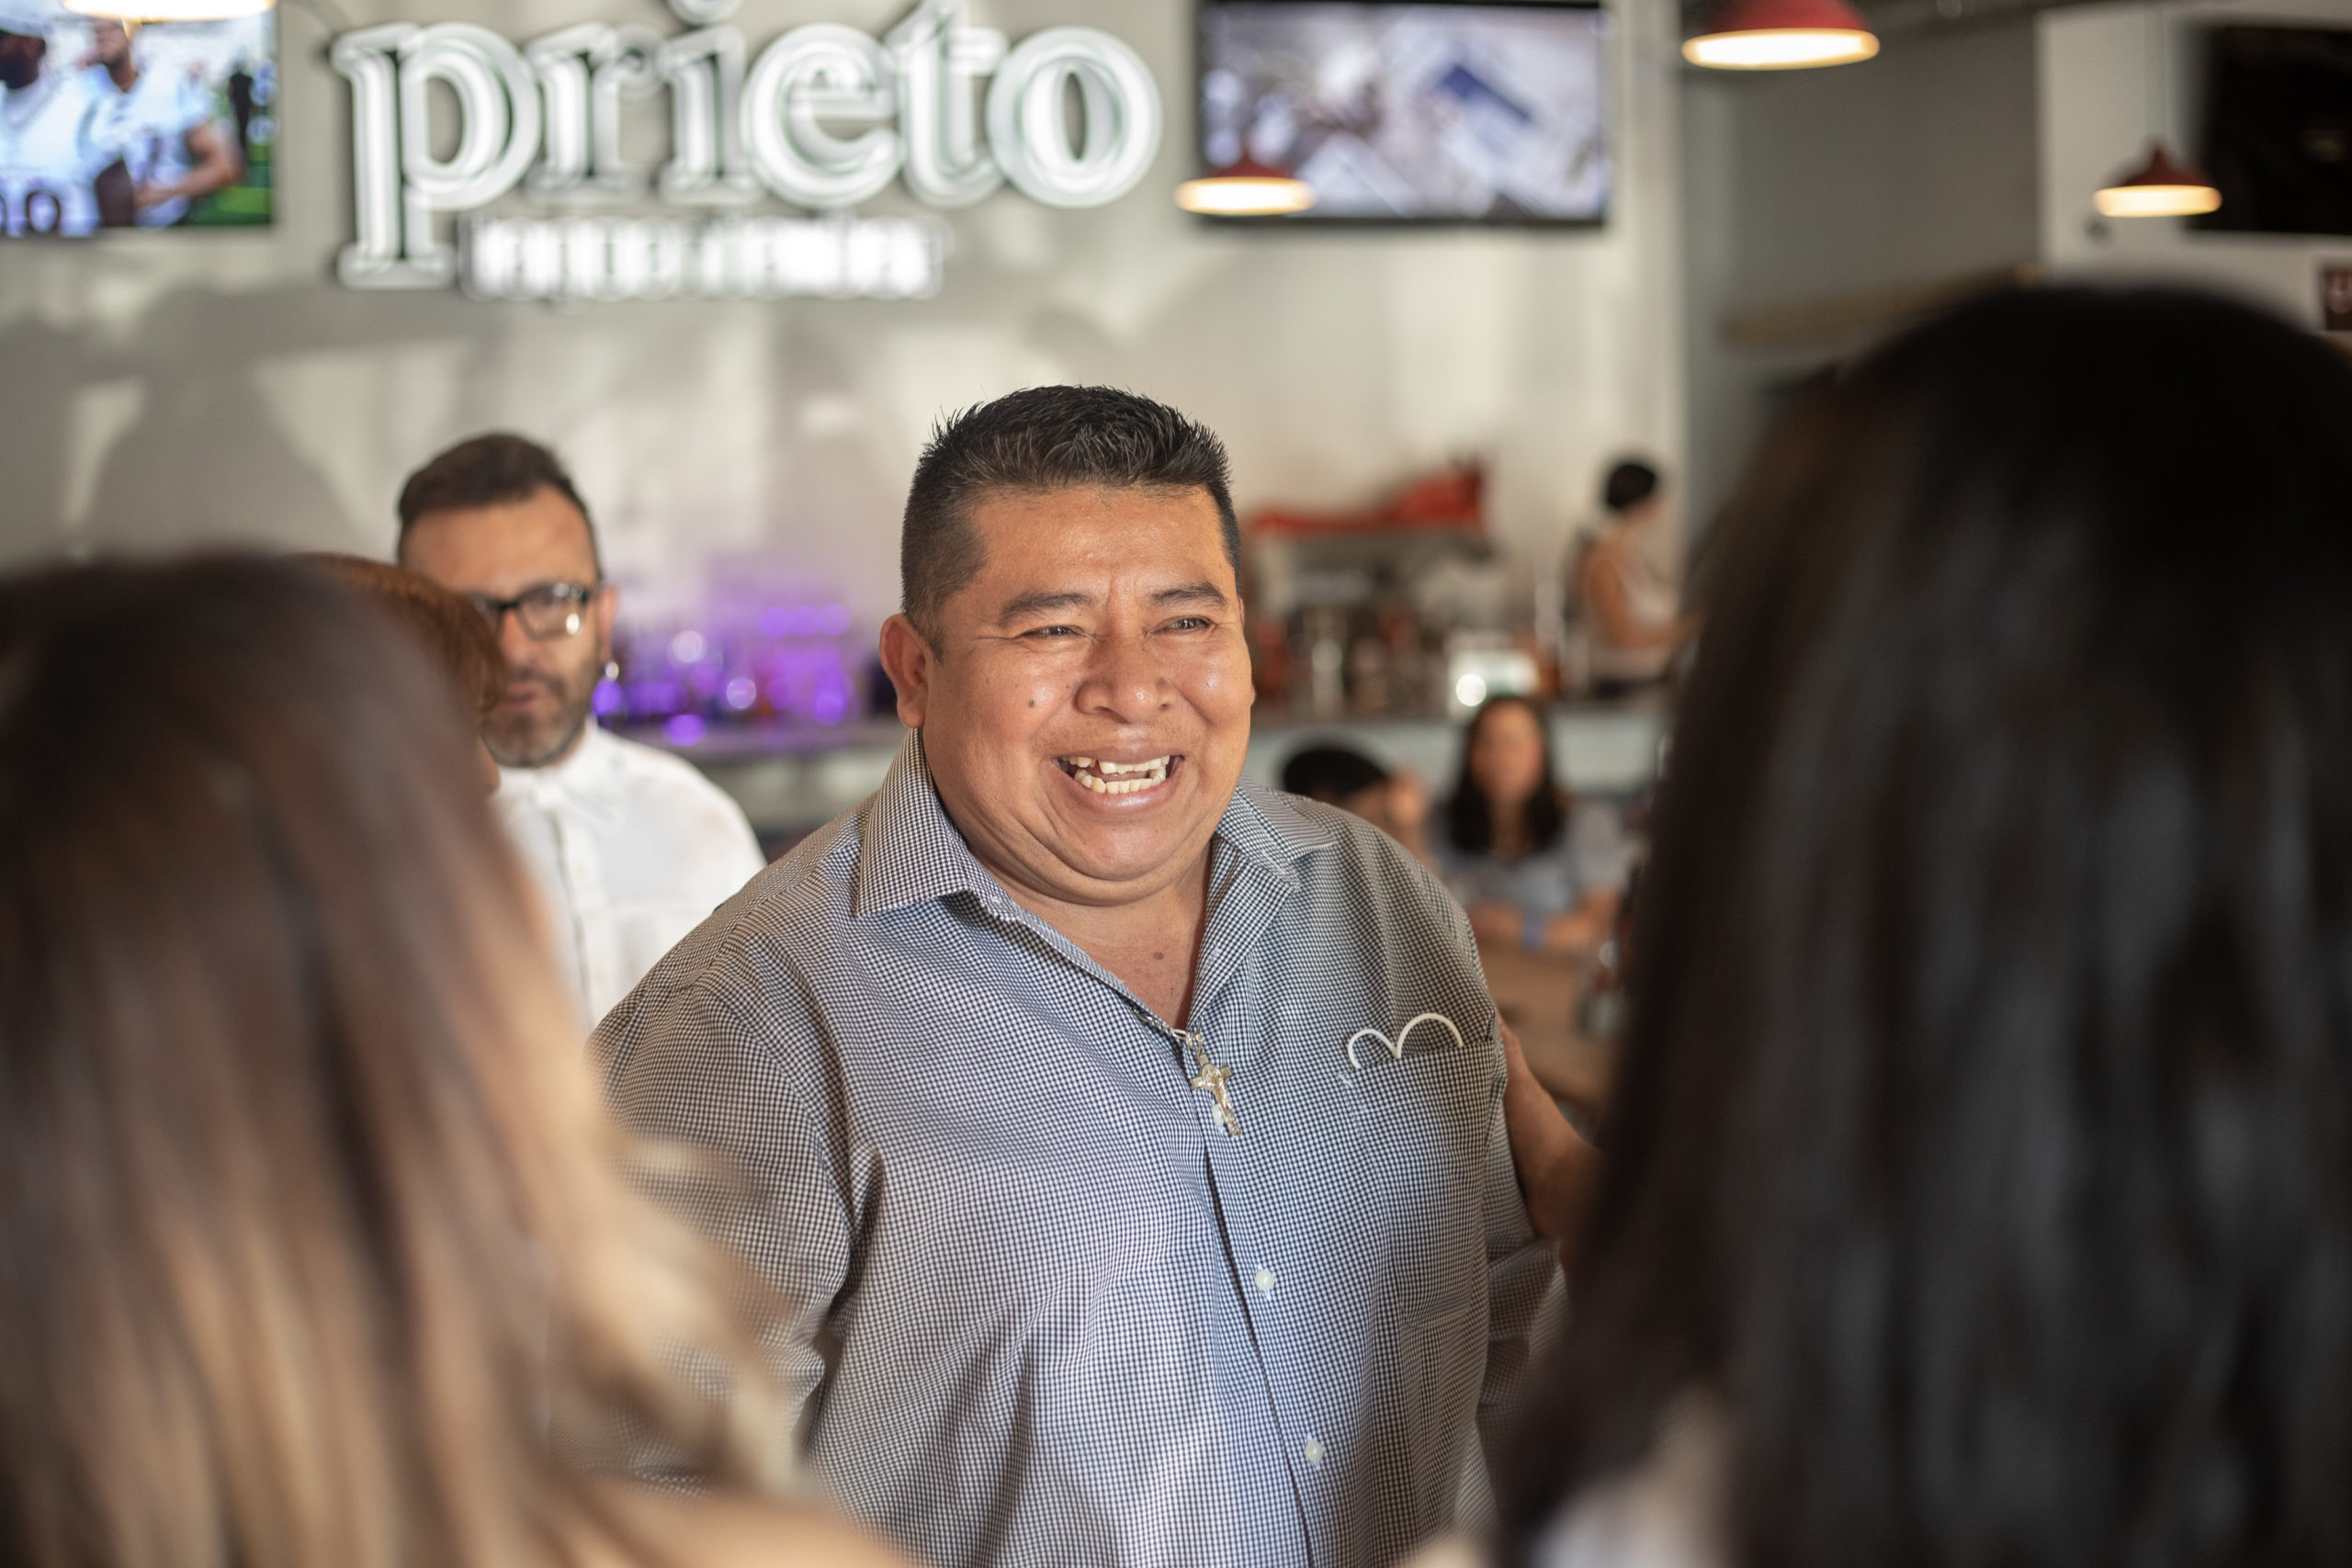 Casa staff Pablo smiles before he shares his employee story